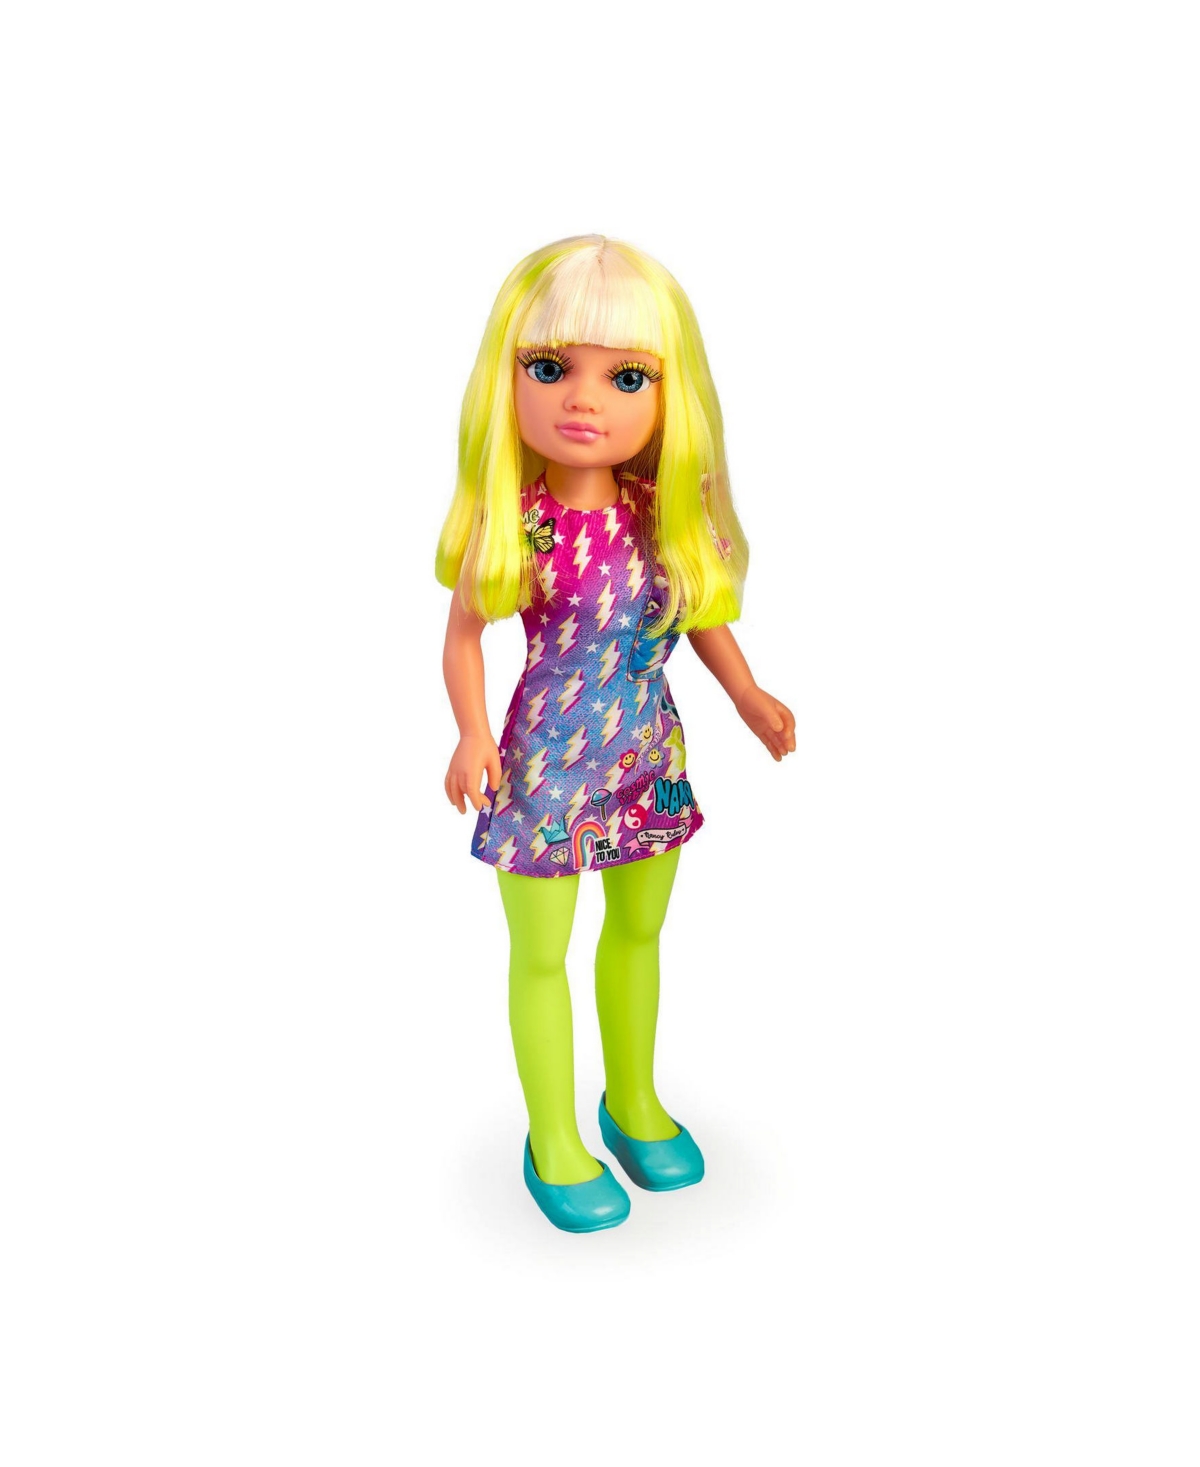 Nancy Neon Fashion Doll With Yellow Hair In Multicolor